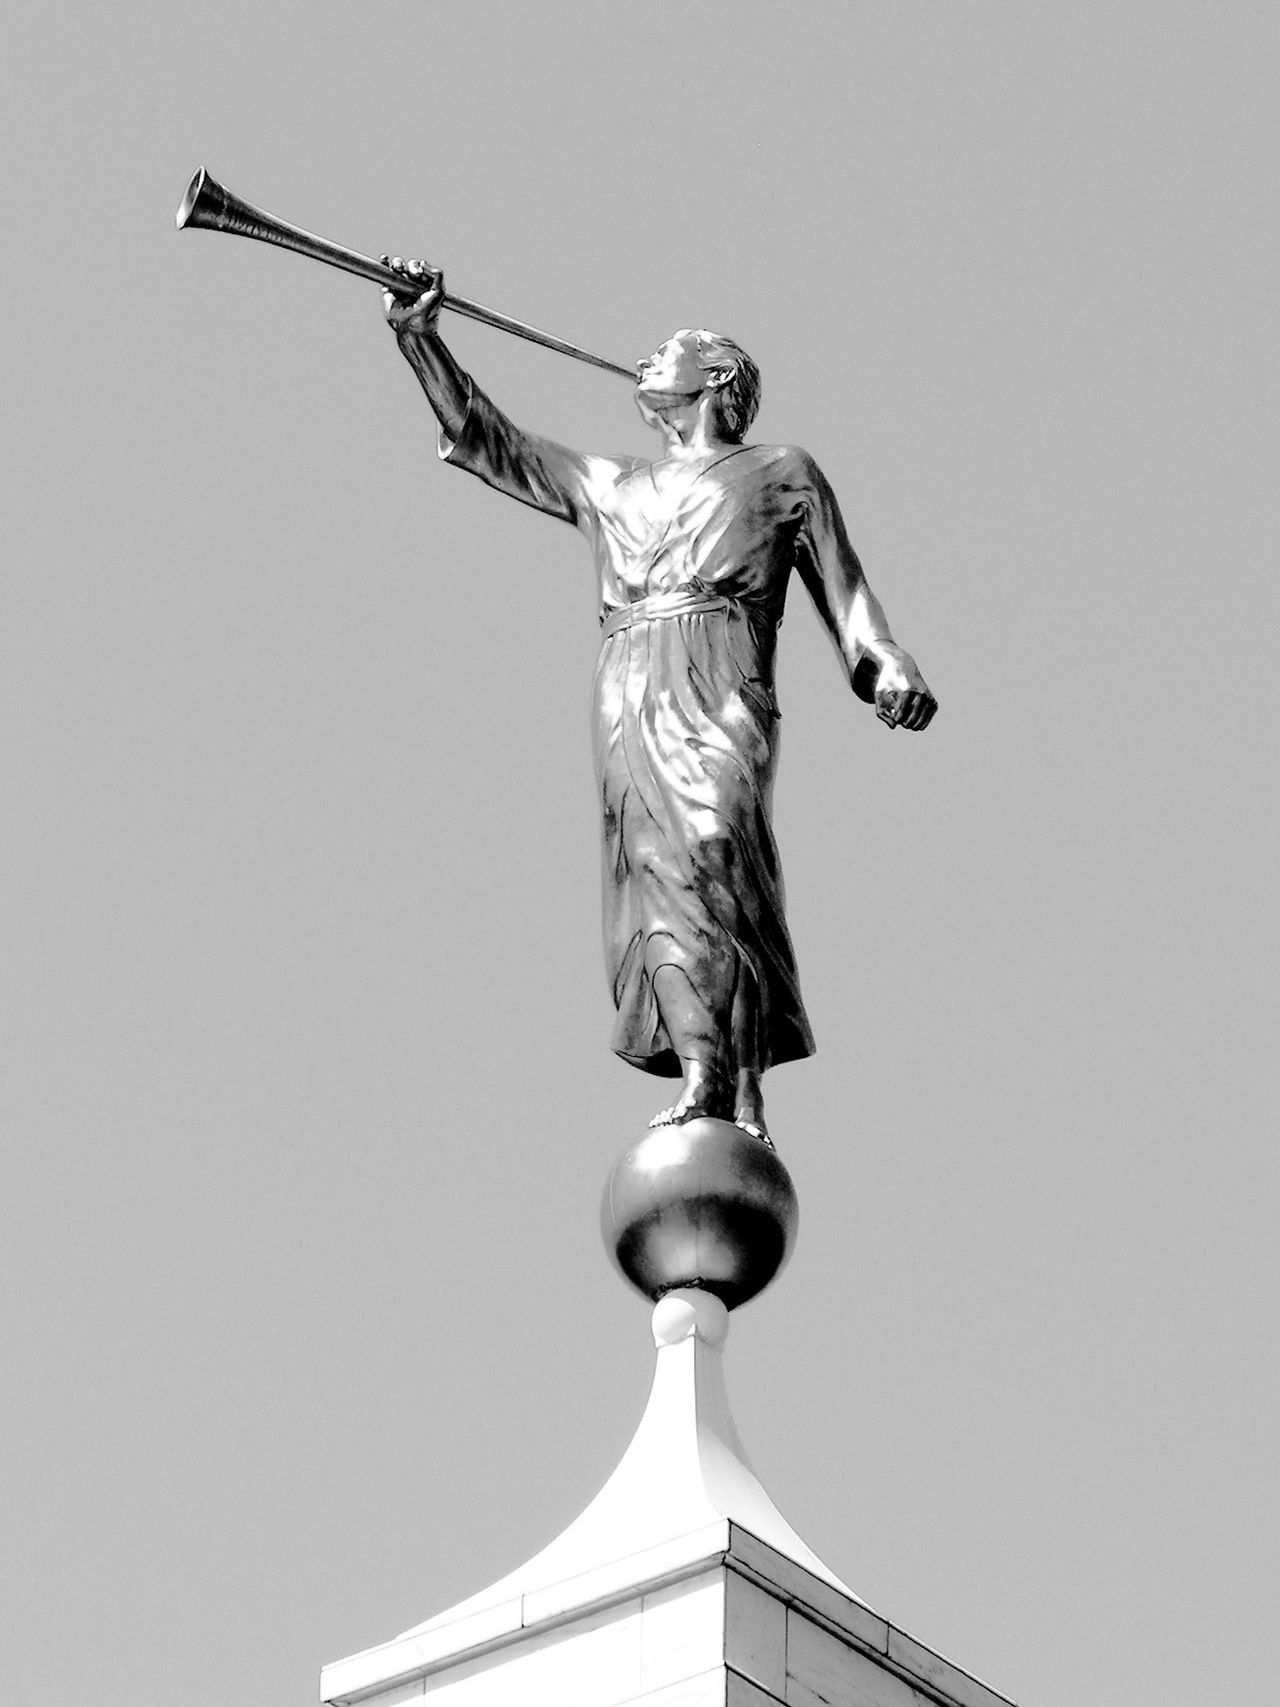 A close-up black-and-white view of the angel Moroni statue on top of a temple spire.